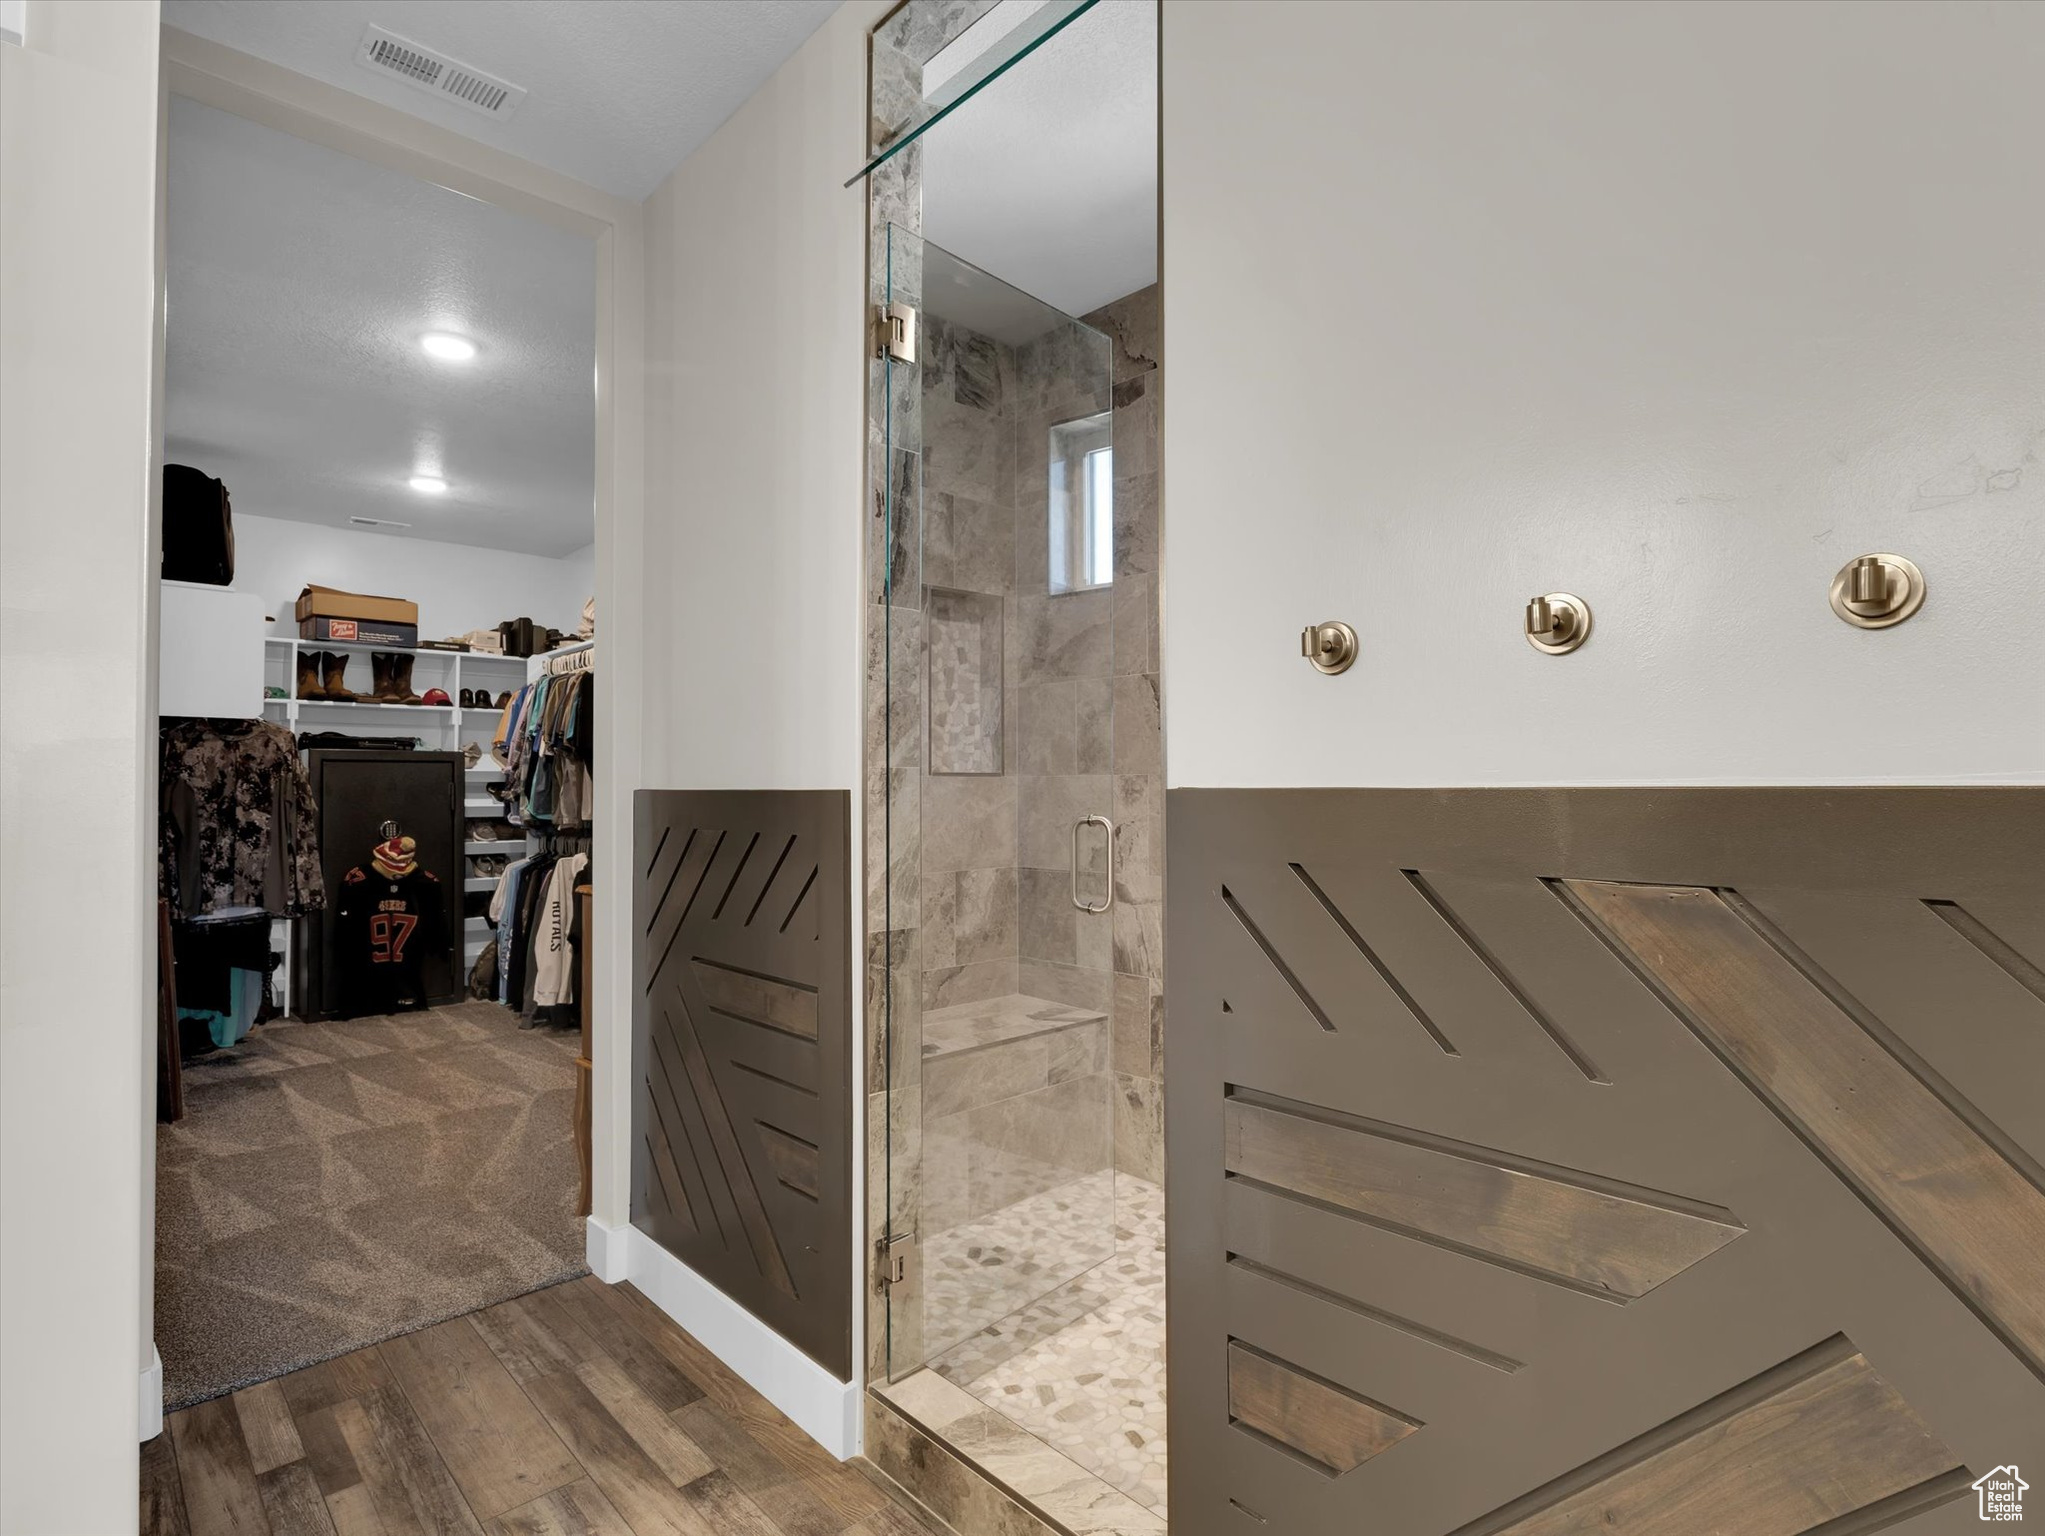 Primary bathroom with hardwood / wood-style flooring, wall feature and a tile shower